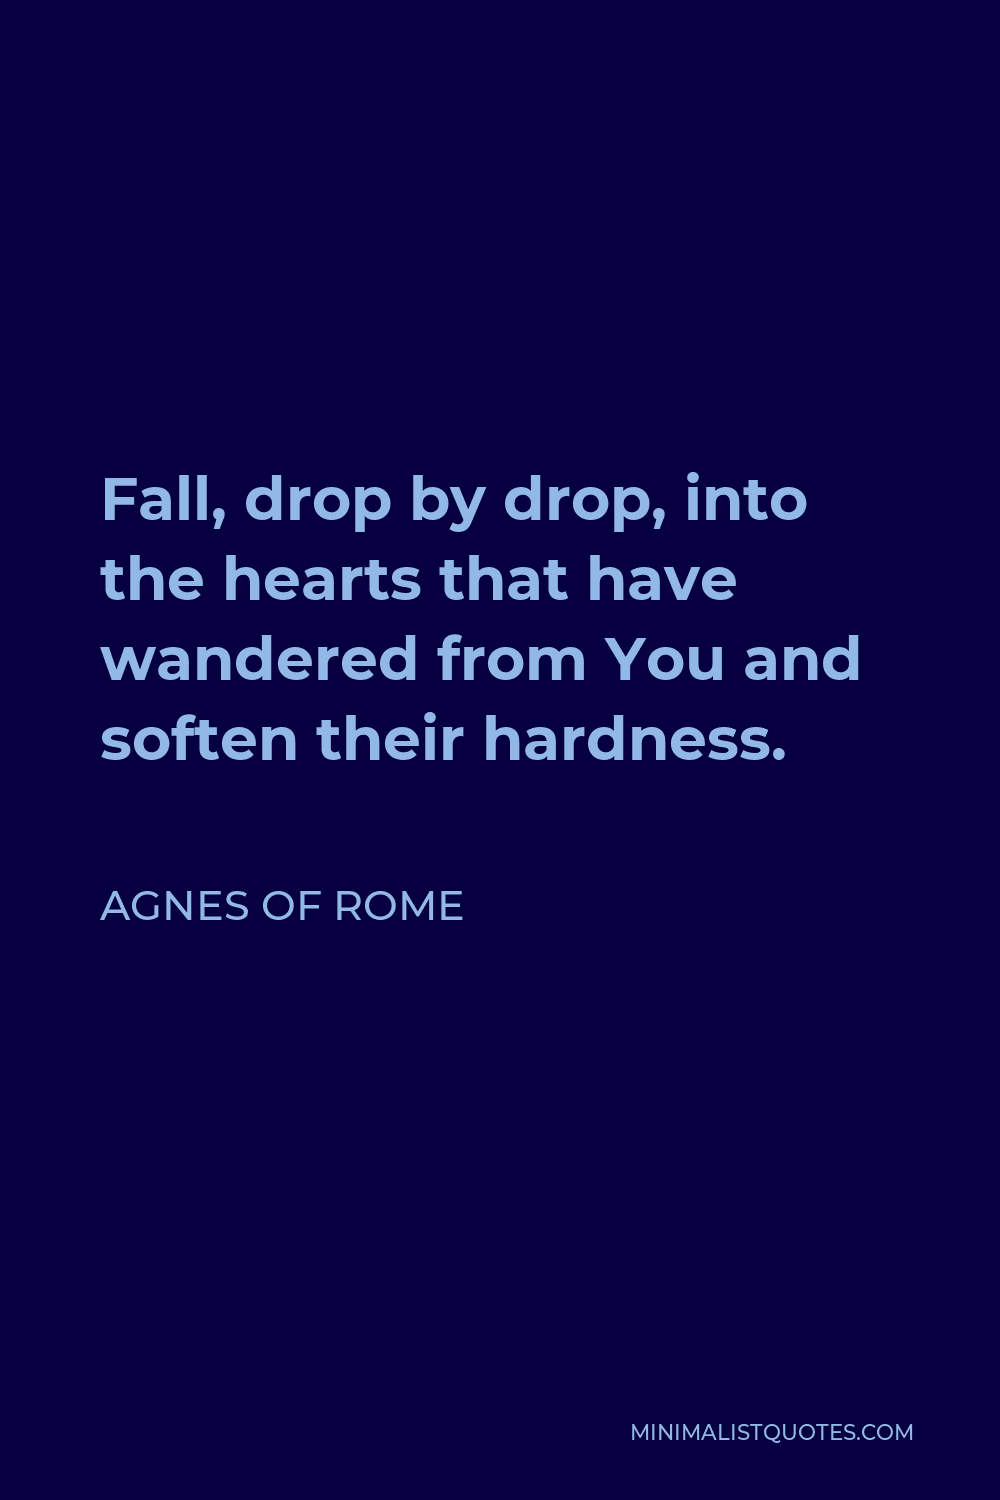 Agnes of Rome Quote - Fall, drop by drop, into the hearts that have wandered from You and soften their hardness.